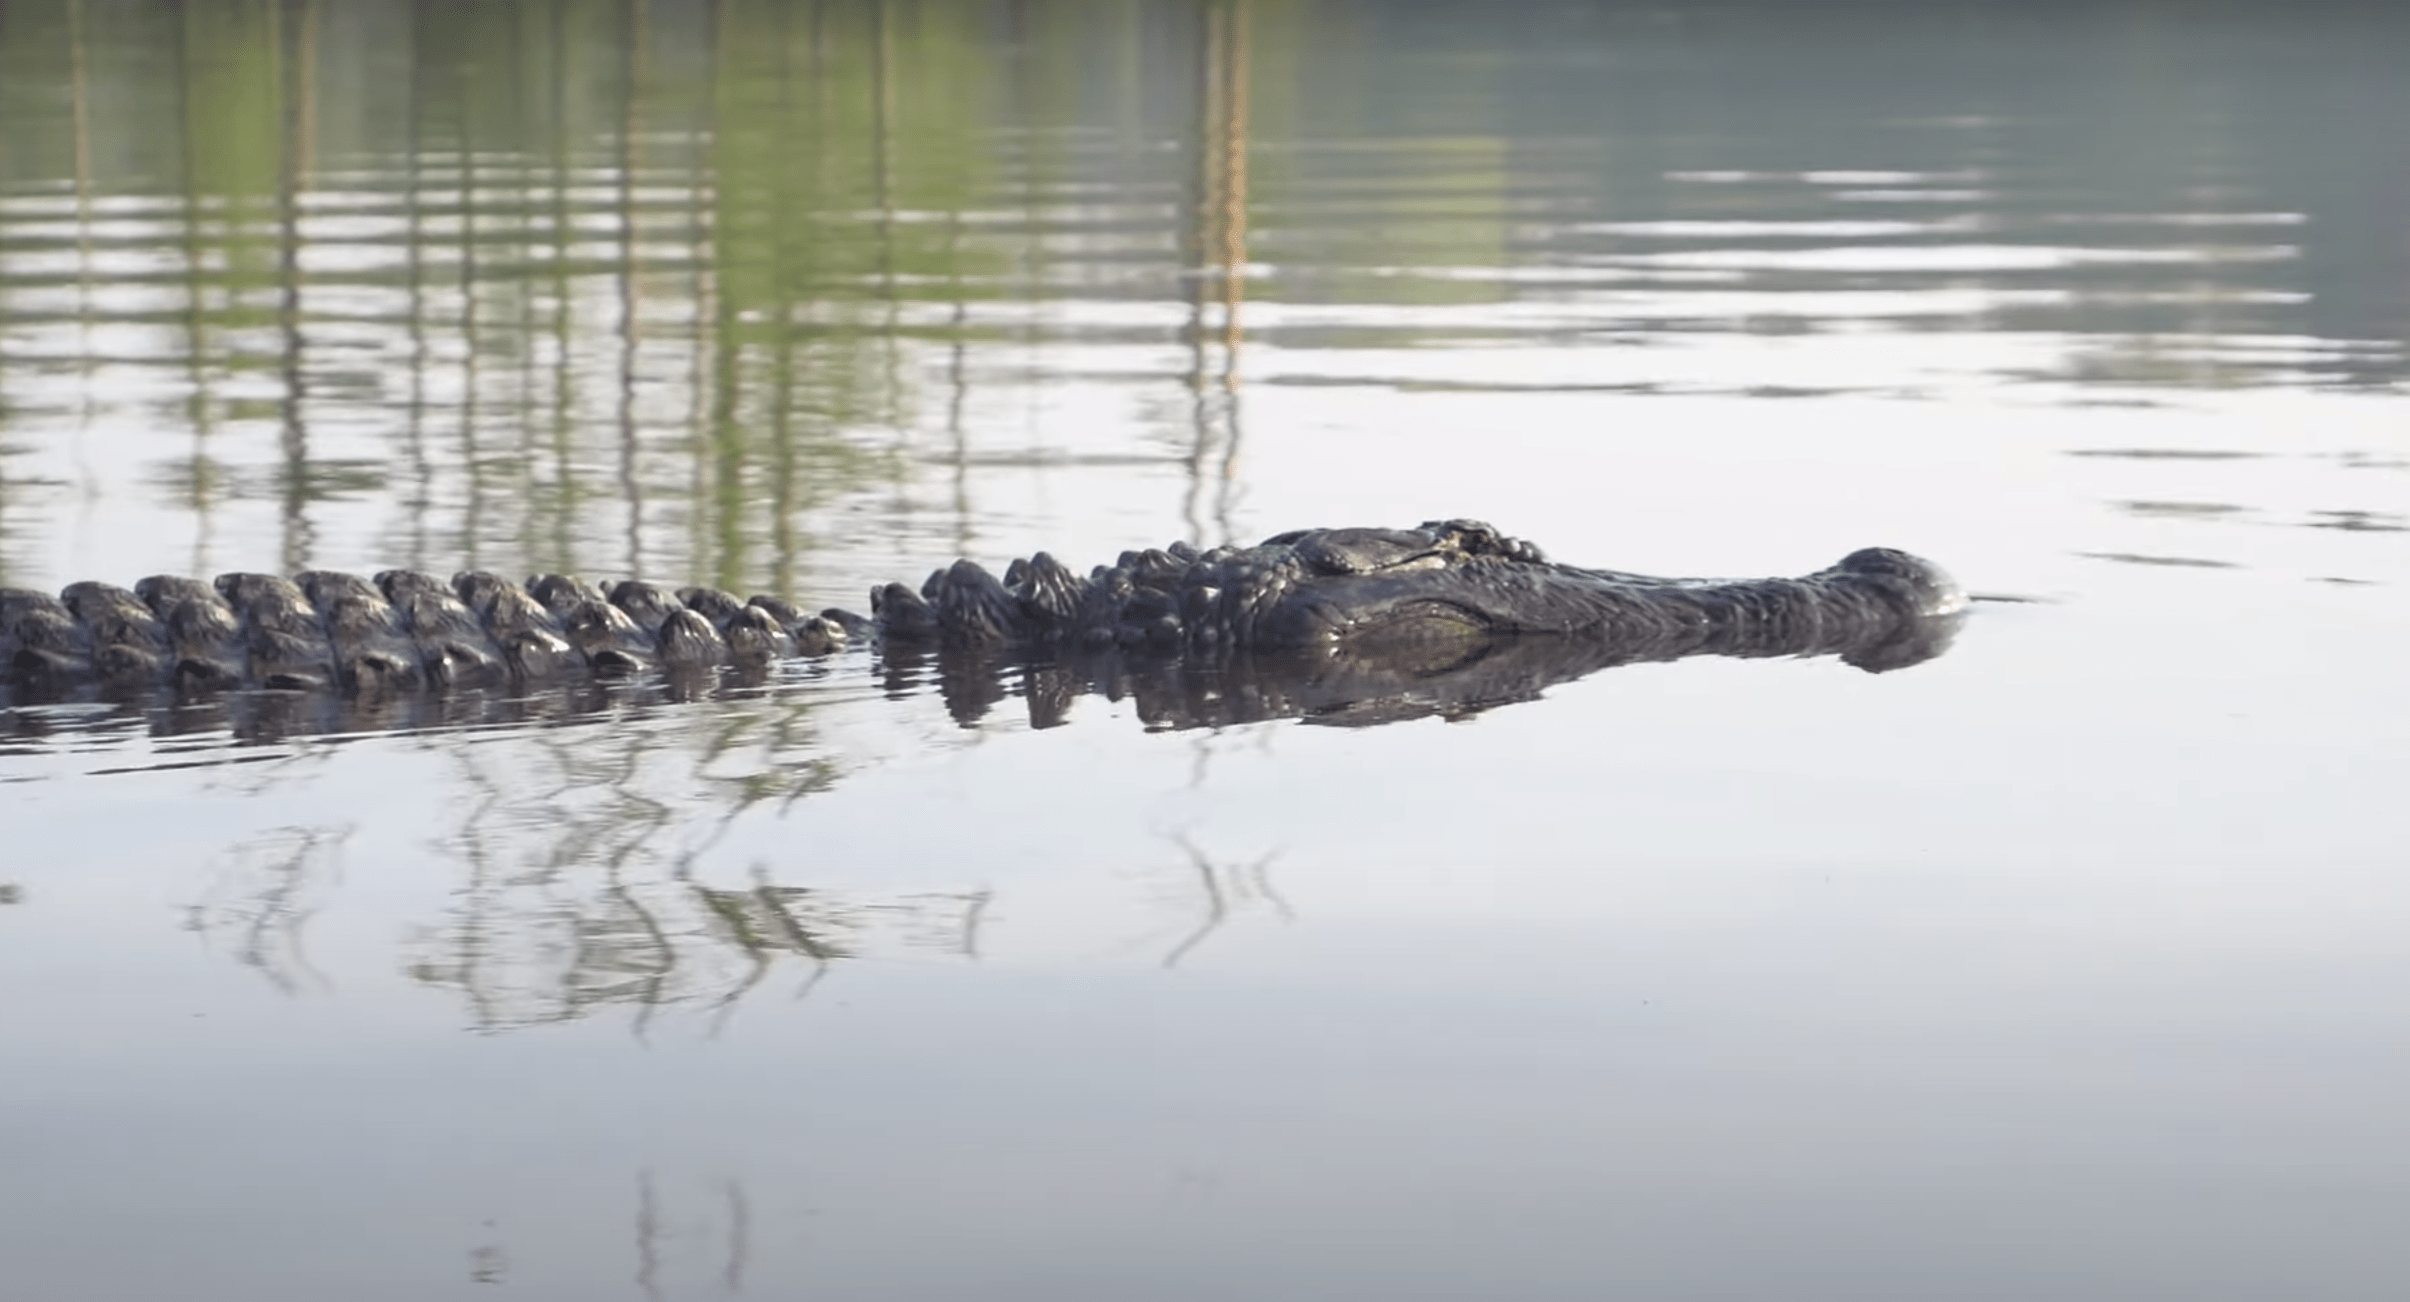 The Monster of Lake Conway: Large Alligator Captured on Video in Central Arkansas